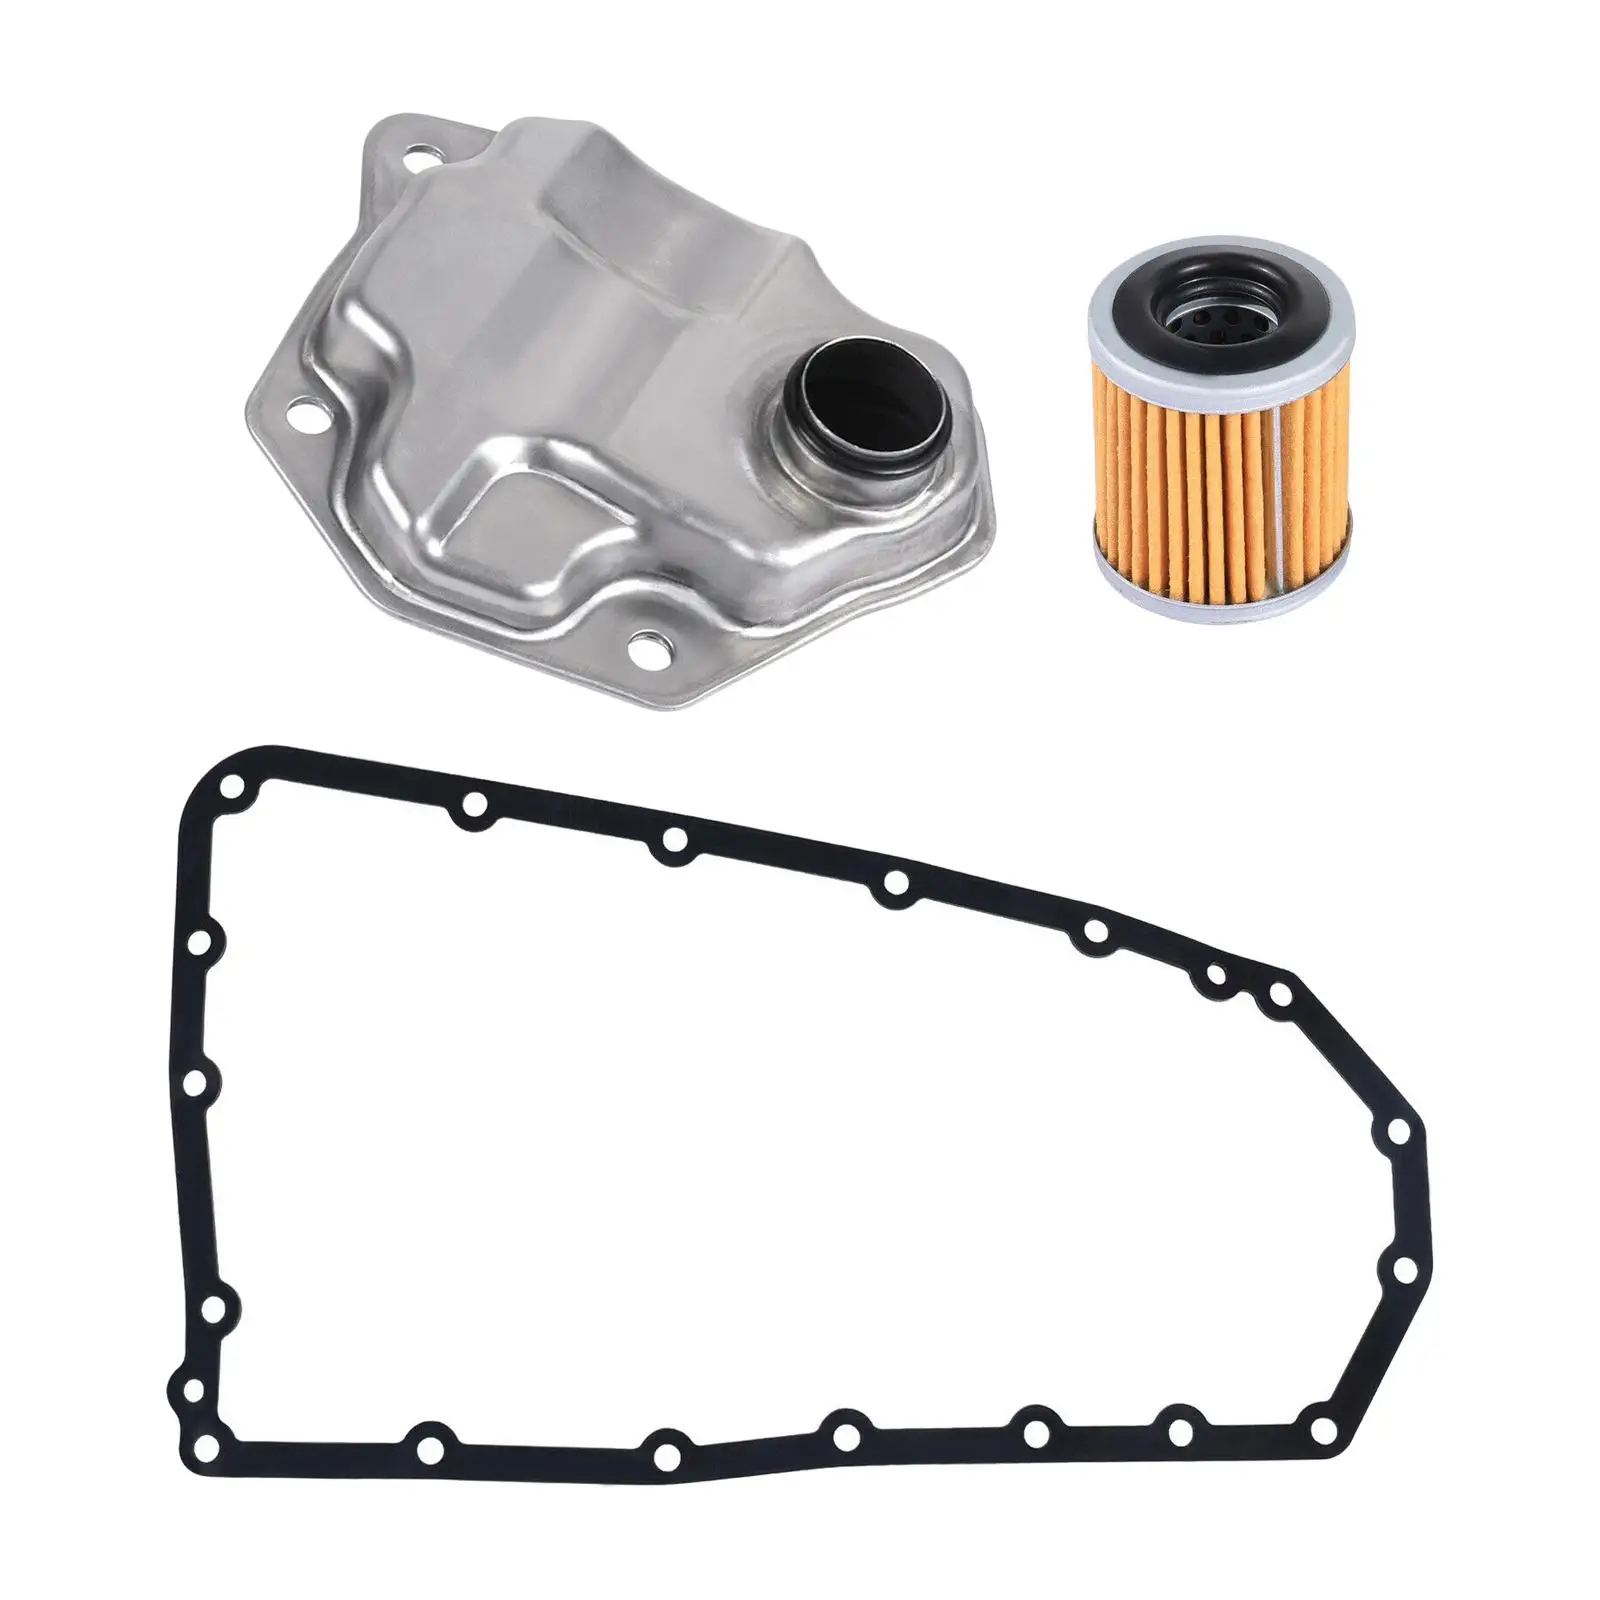 Auto Transmission Oil Filter Strainer & Pan Gasket 31728-1XZ0D for ALTIMA 2007-2013 Rogue 2008-2016 2824A006 31728-1XF03